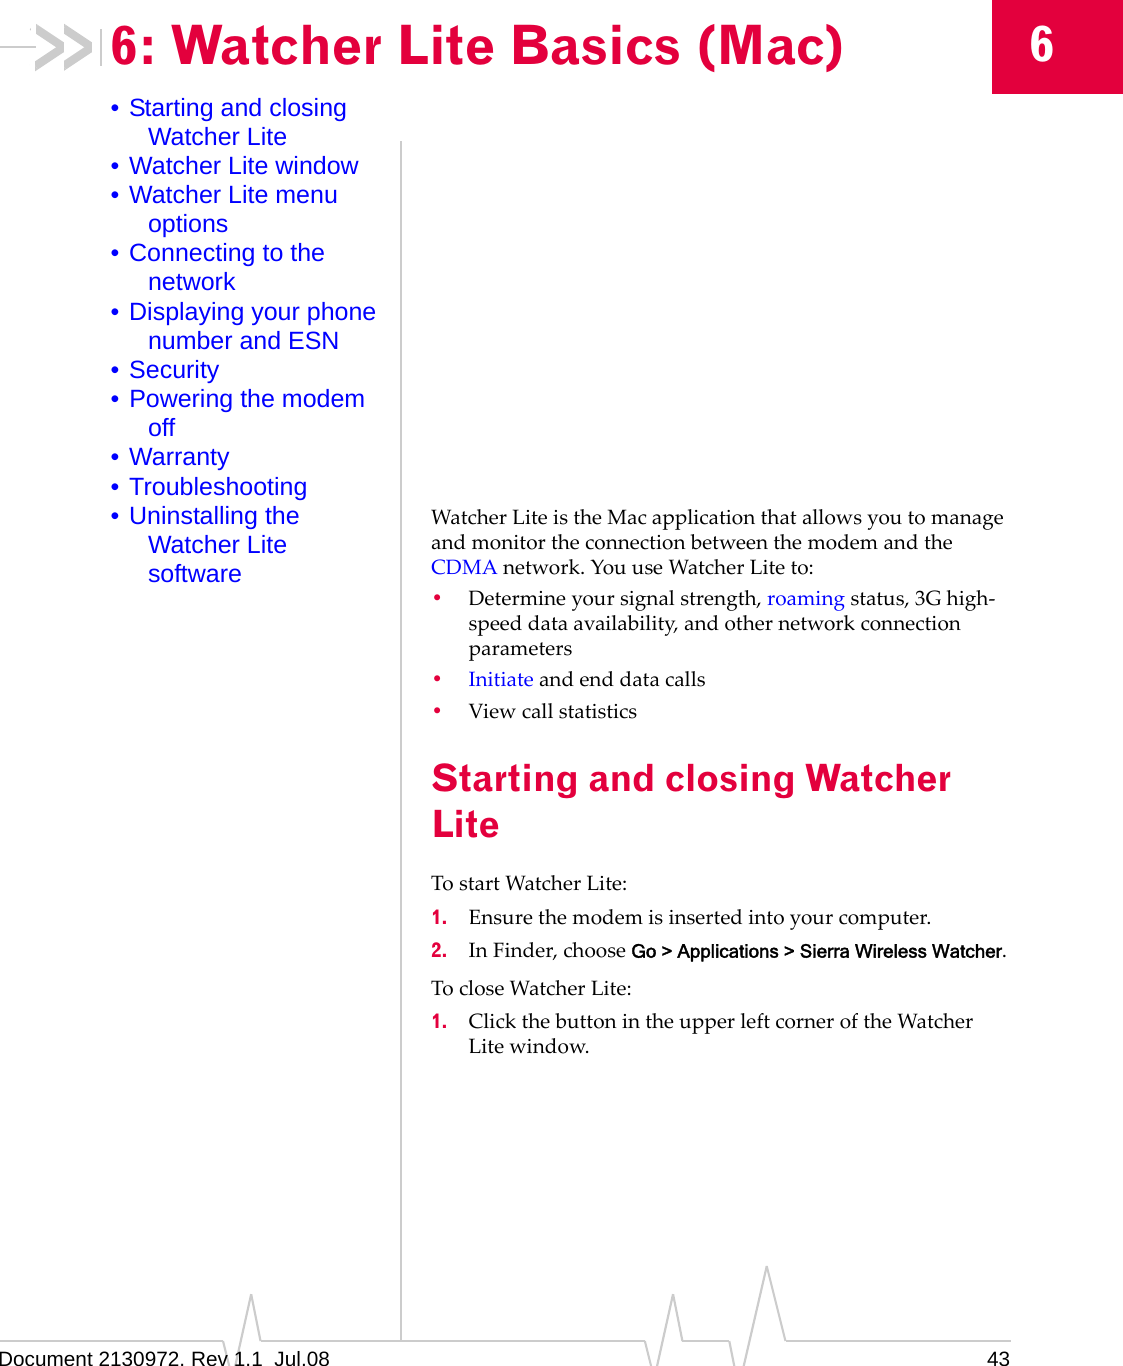 Document 2130972. Rev 1.1  Jul.08 4366: Watcher Lite Basics (Mac)• Starting and closing Watcher Lite• Watcher Lite window• Watcher Lite menu options• Connecting to the network• Displaying your phone number and ESN• Security• Powering the modem off• Warranty• Troubleshooting• Uninstalling the Watcher Lite softwareWatcherLiteistheMacapplicationthatallowsyoutomanageandmonitortheconnectionbetweenthemodemandtheCDMAnetwork.YouuseWatcherLiteto:•Determineyoursignalstrength,roamingstatus,3Ghigh‐speeddataavailability,andothernetworkconnectionparameters•Initiateandenddatacalls•ViewcallstatisticsStarting and closing Watcher LiteTostartWatcherLite:1. Ensurethemodemisinsertedintoyourcomputer.2. InFinder,chooseGo &gt; Applications &gt; Sierra Wireless Watcher.TocloseWatcherLite:1. ClickthebuttonintheupperleftcorneroftheWatcherLitewindow.